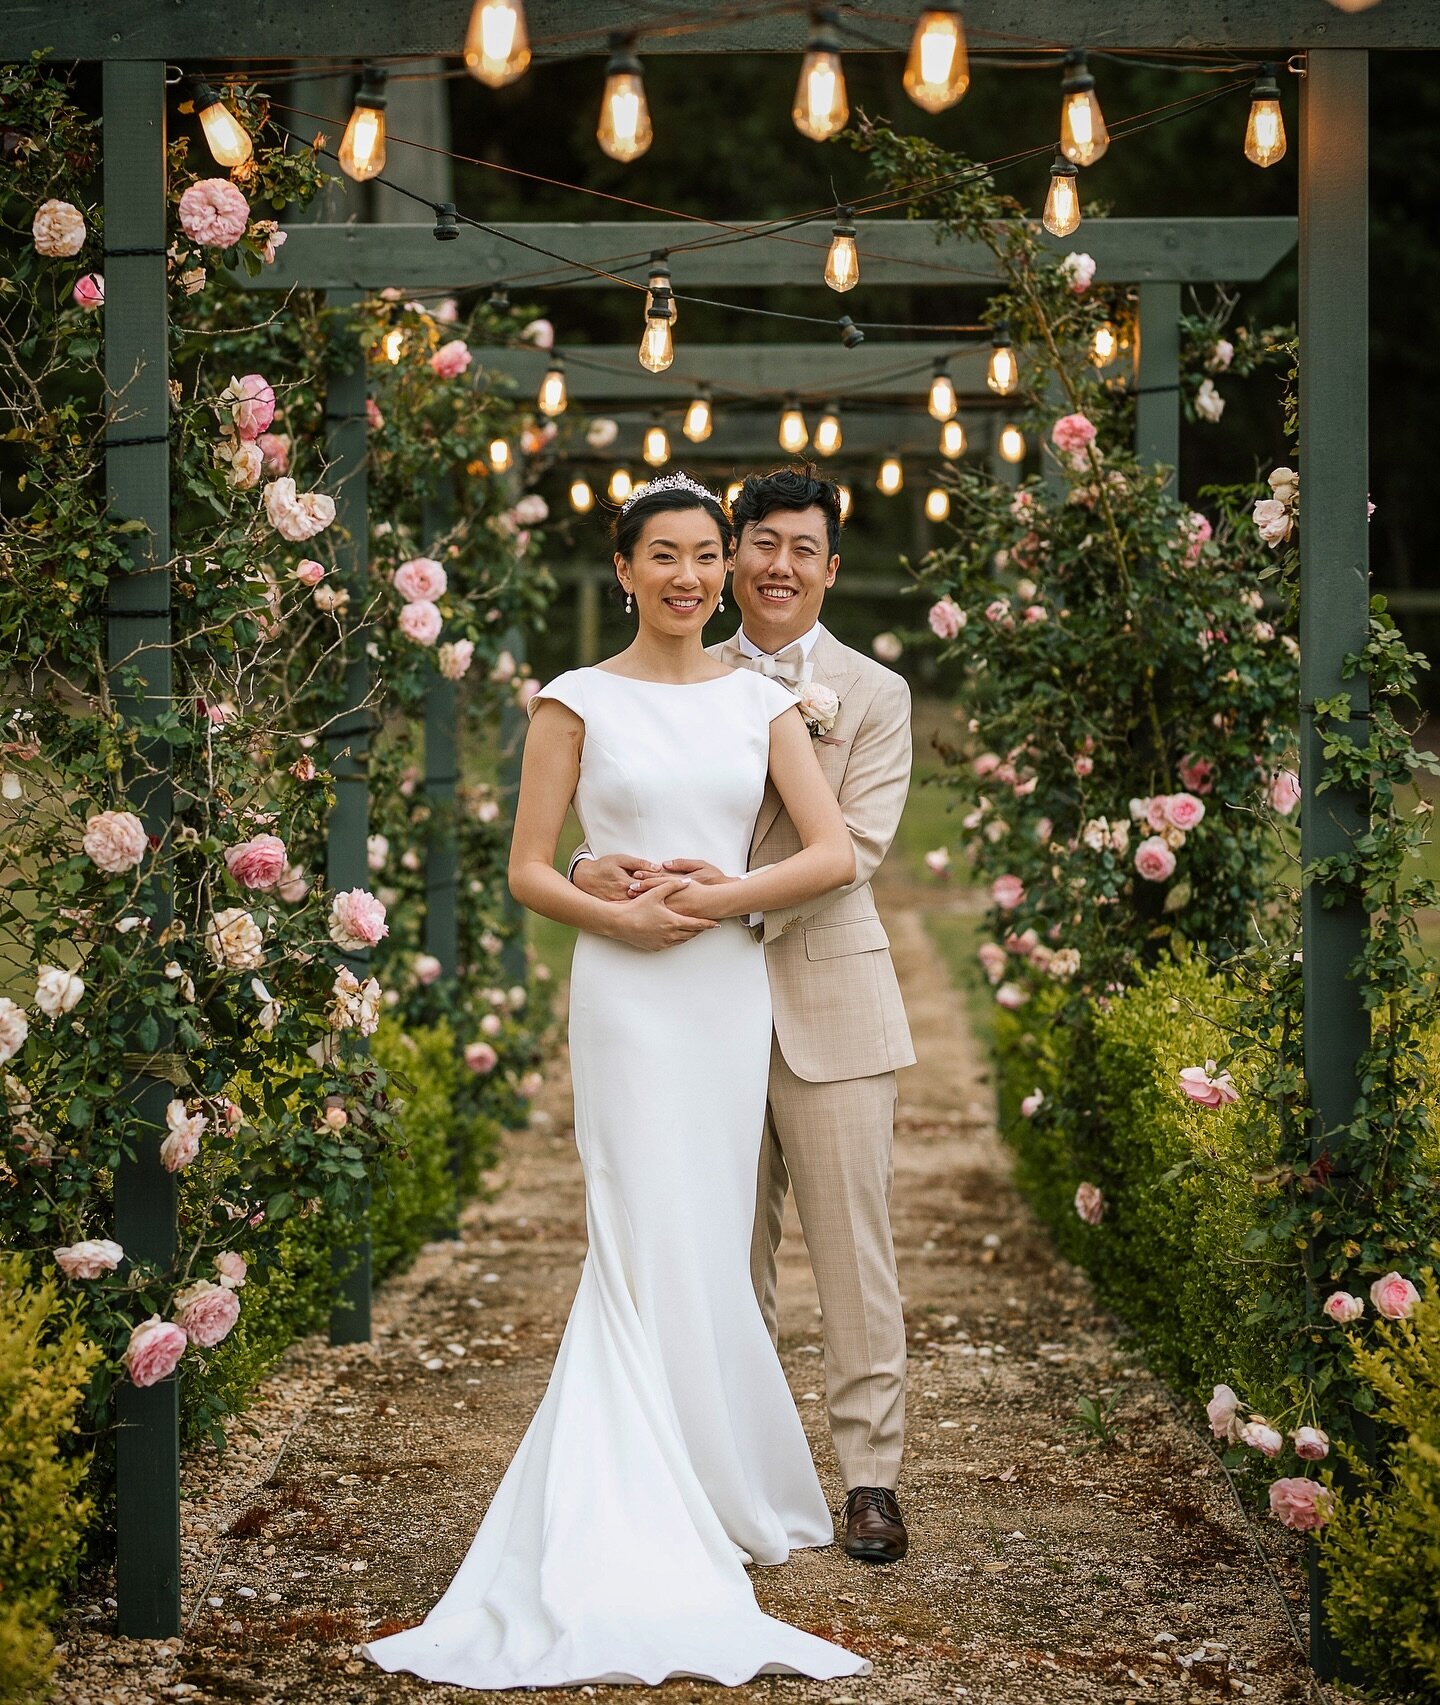 Stella &amp; Ben

04.11.2023

Fortunate are we to be graced by remarkable couples adorned with such exquisite taste. We are so grateful for the privilege of contributing to this momentous occasion.

Makeup &amp; Hair: @jessicapavlovic
Celebrant: @mar